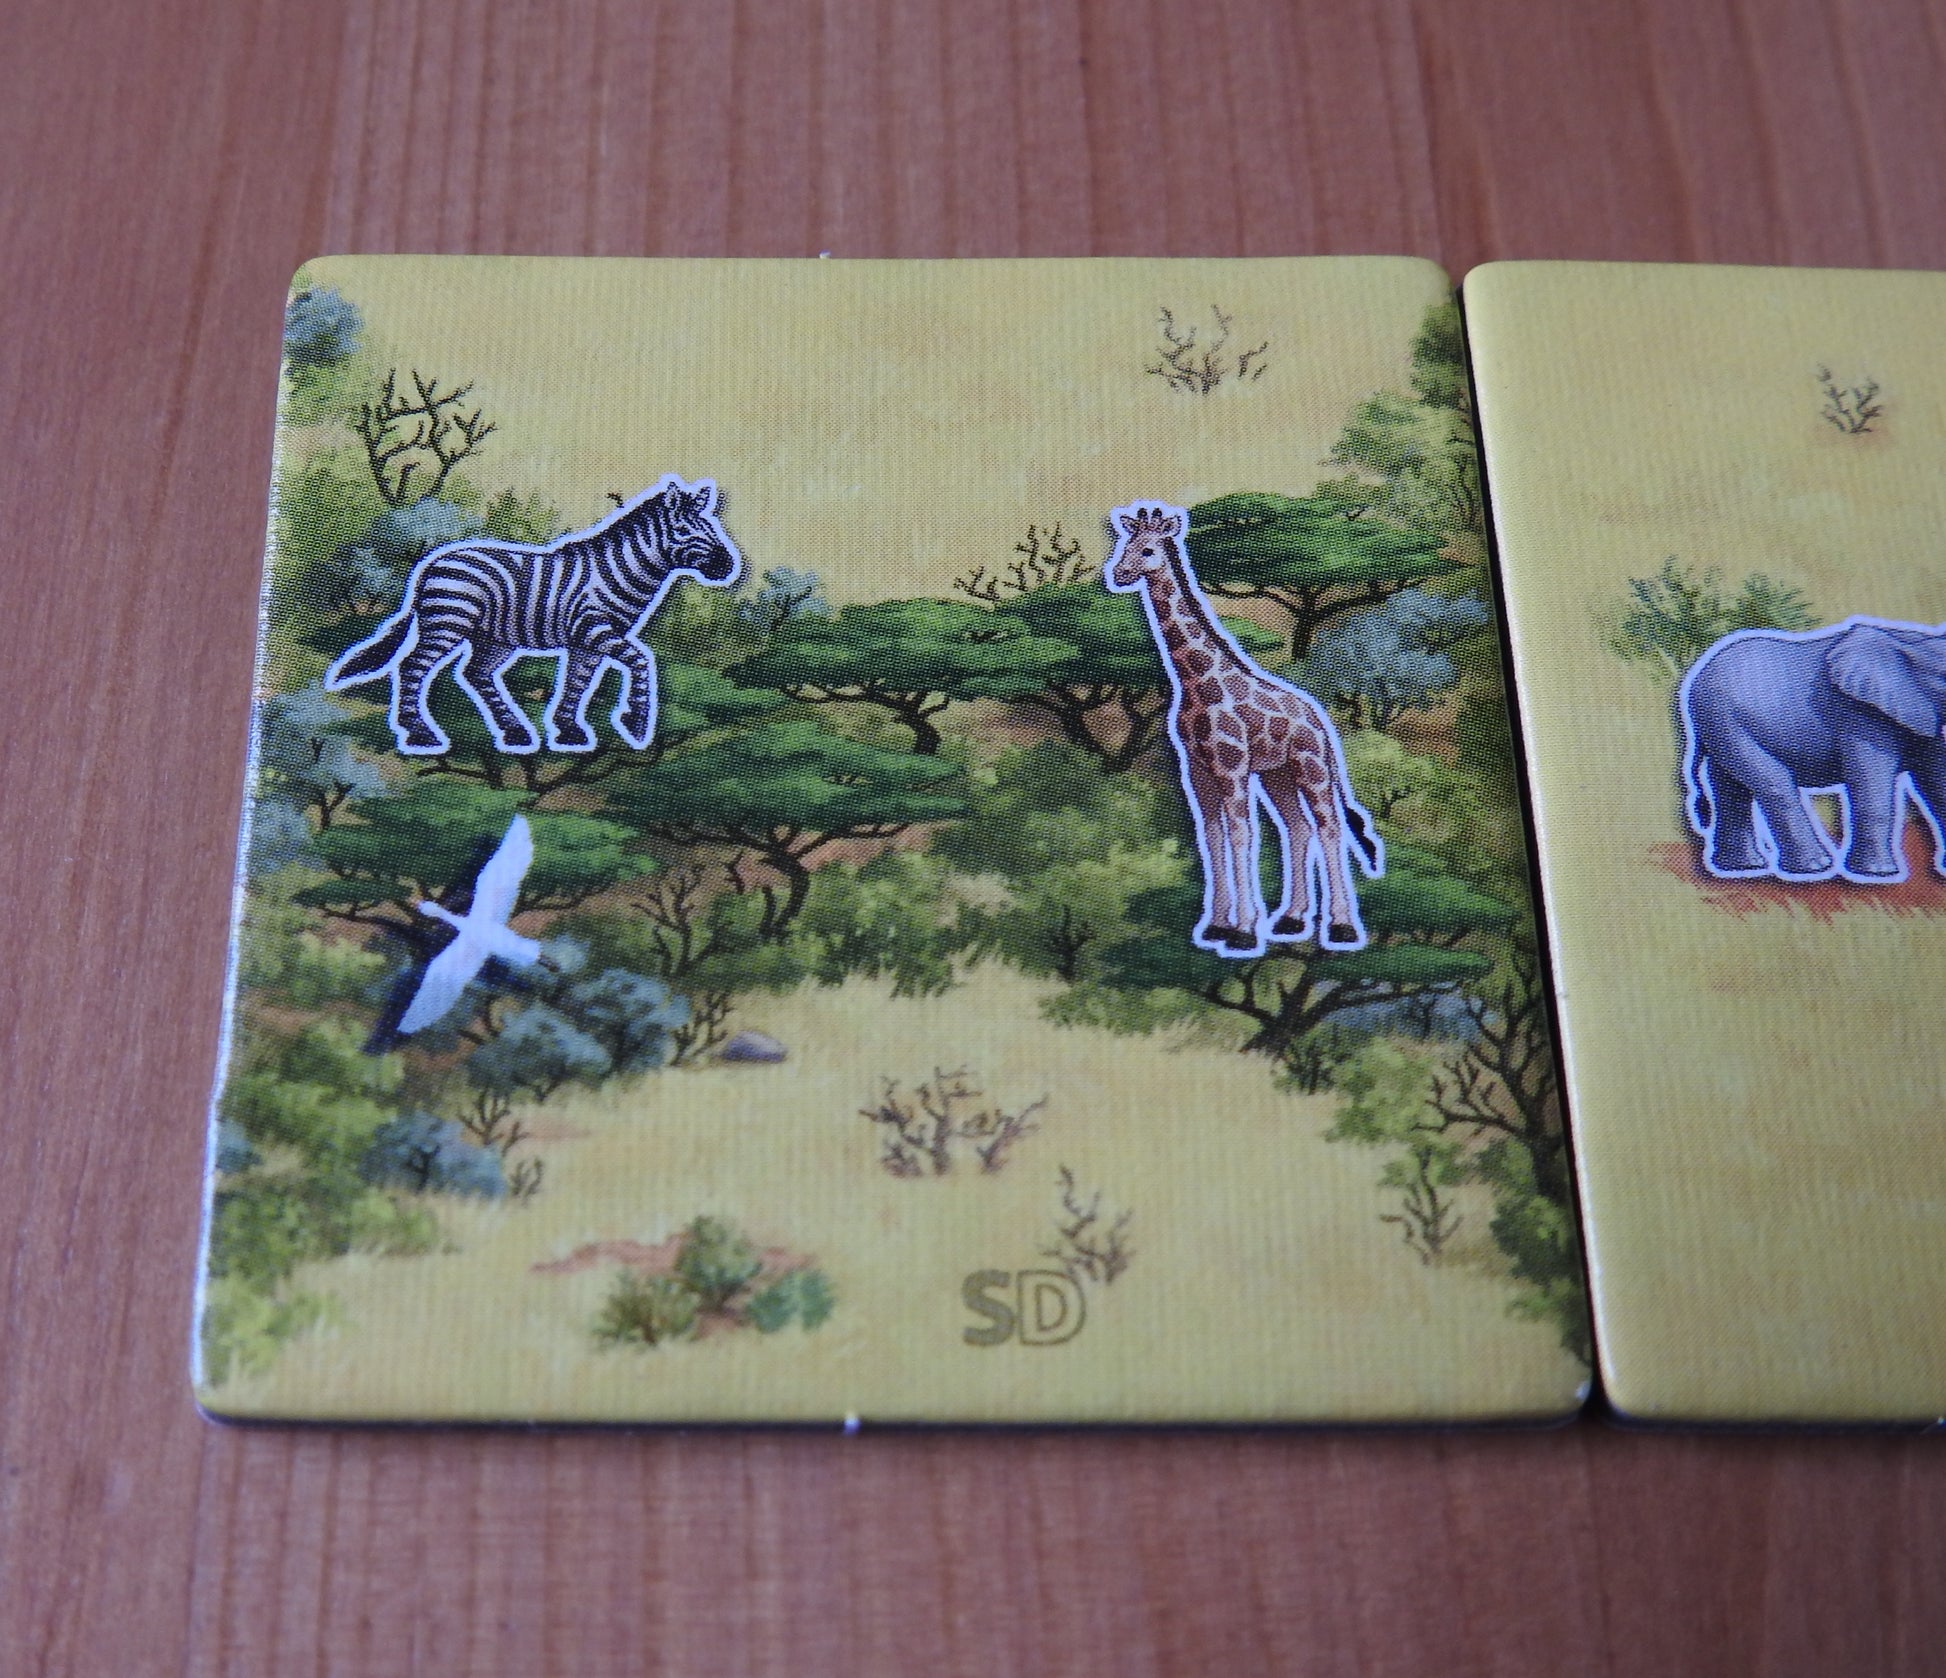 Closer view of one of the included tiles, featuring a zebra, a giraffe and a bird flying overhead in this Spiel Doch 2 Tile Promo for Carcassonne Safari.